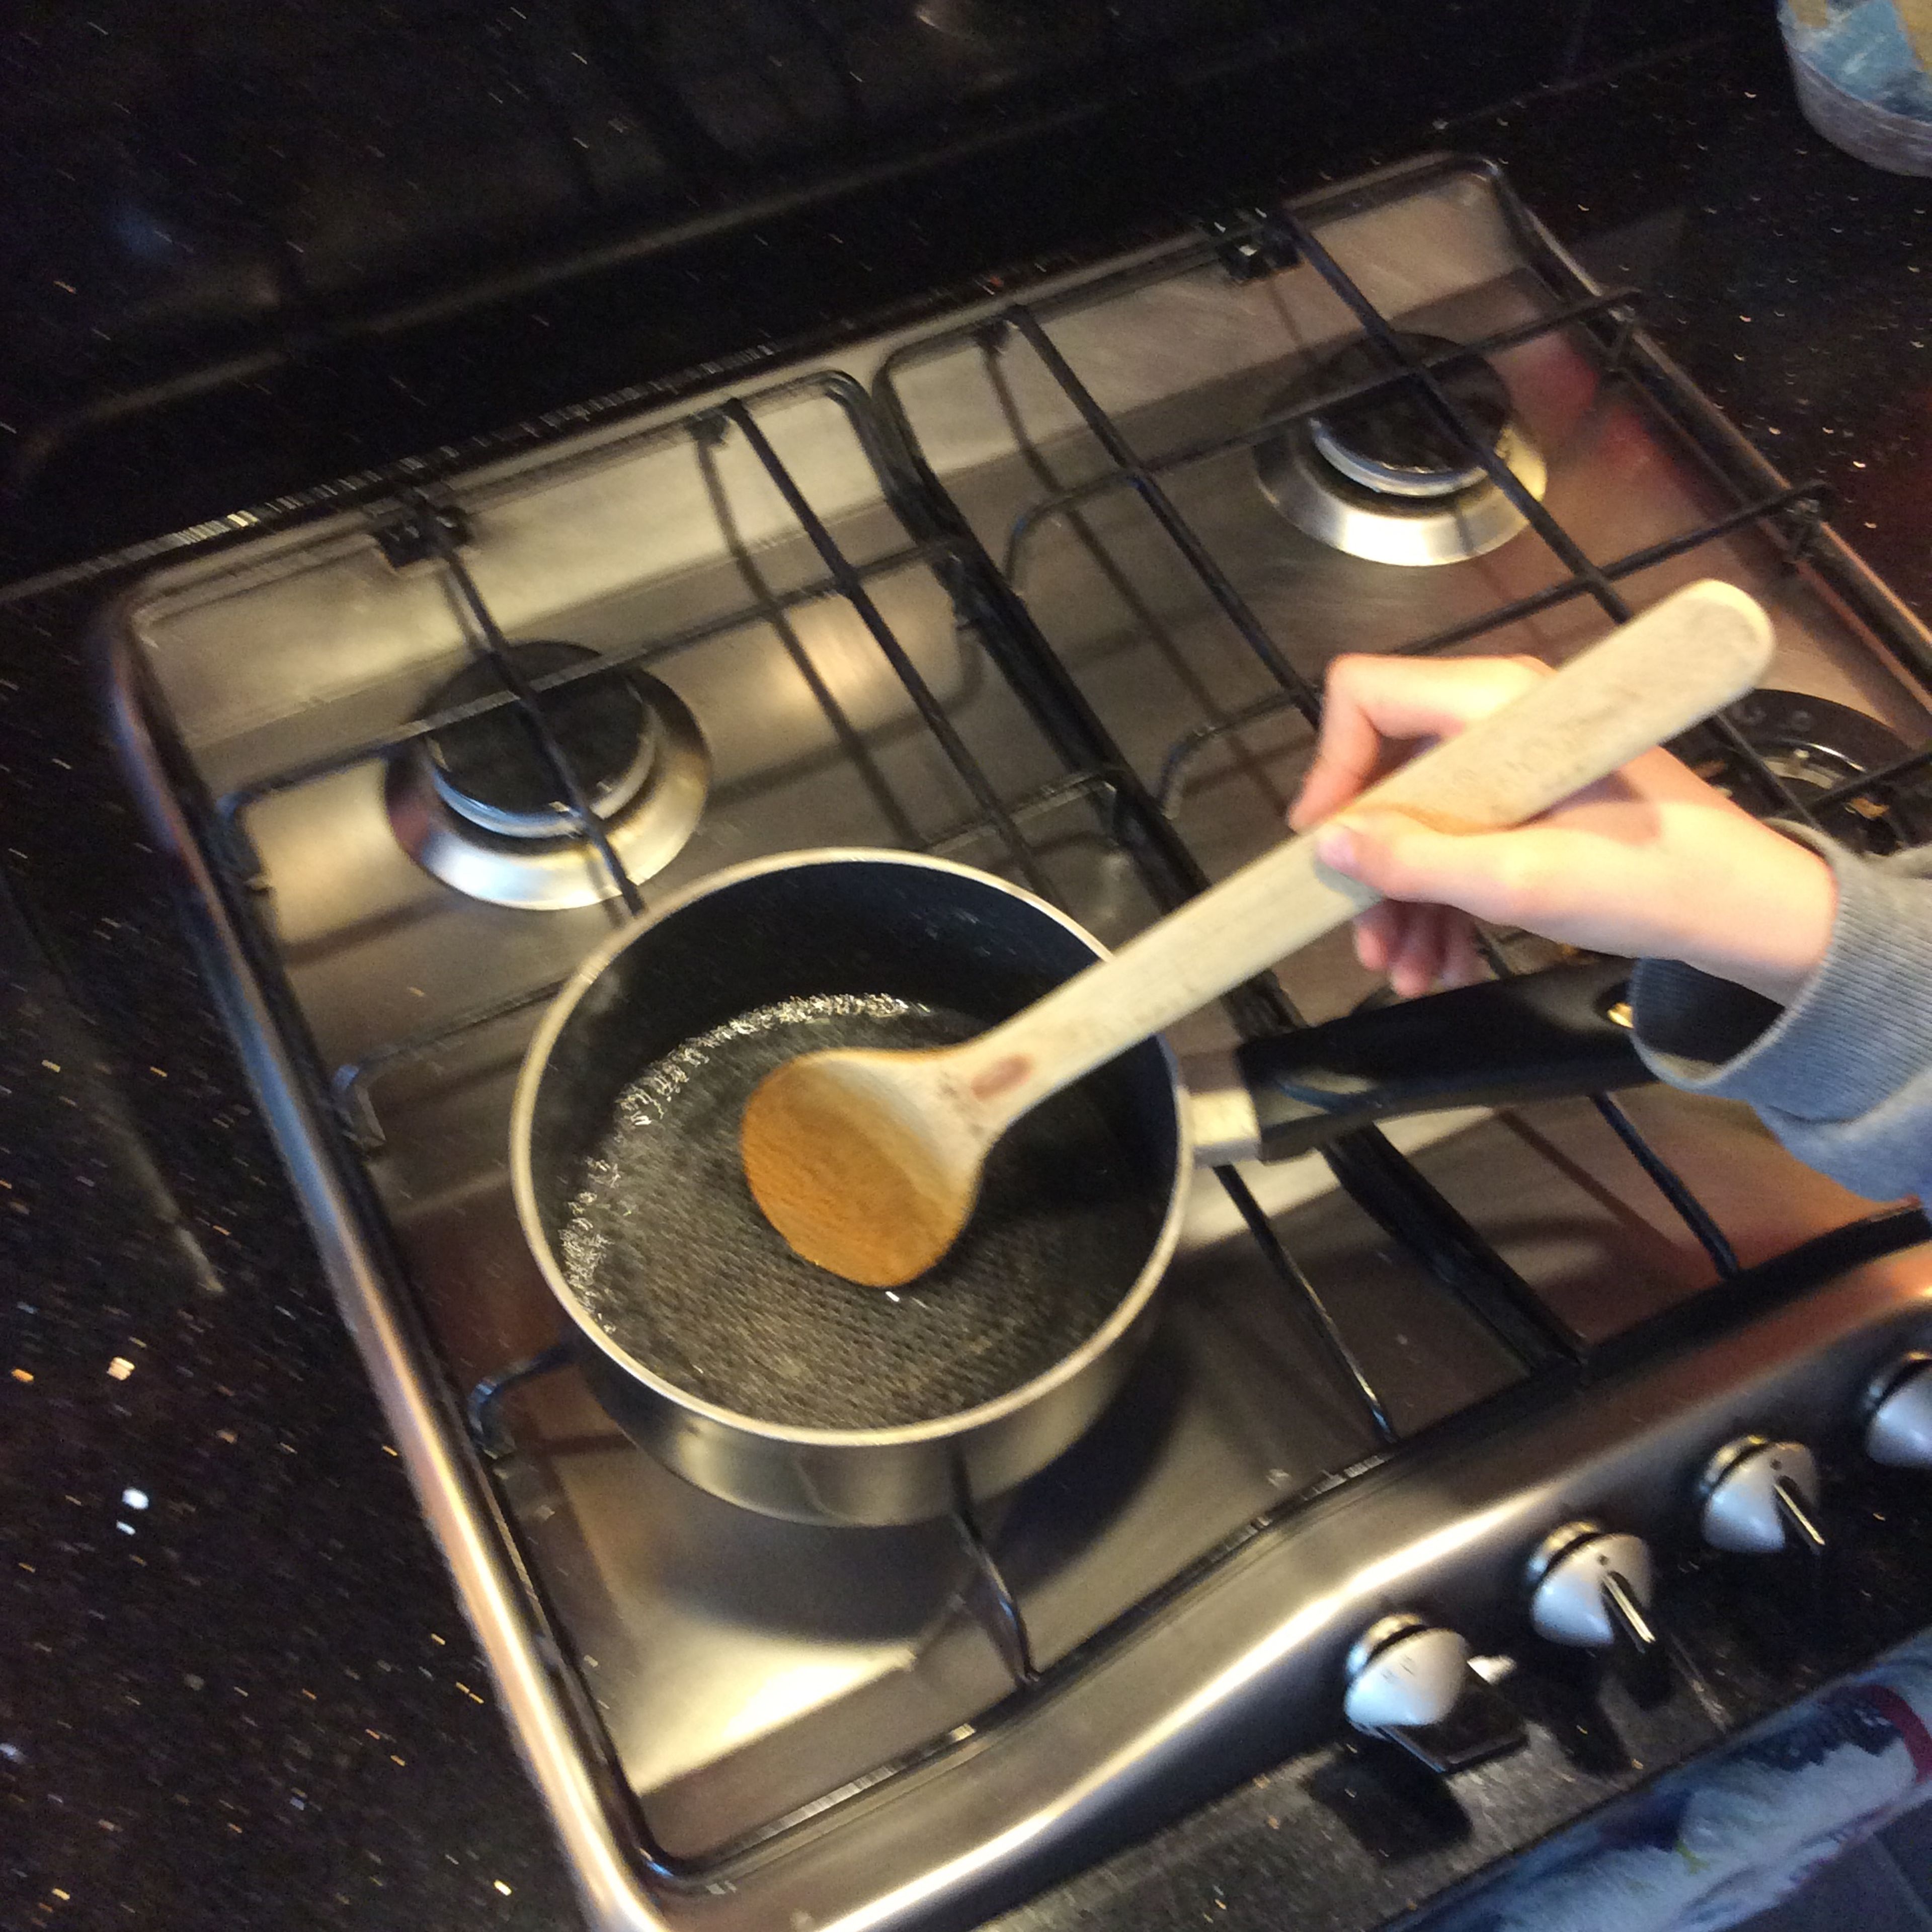 Weigh the water and sugar and put on the heat. Boil for 1.5 mins and let cool to make sugar syrup.